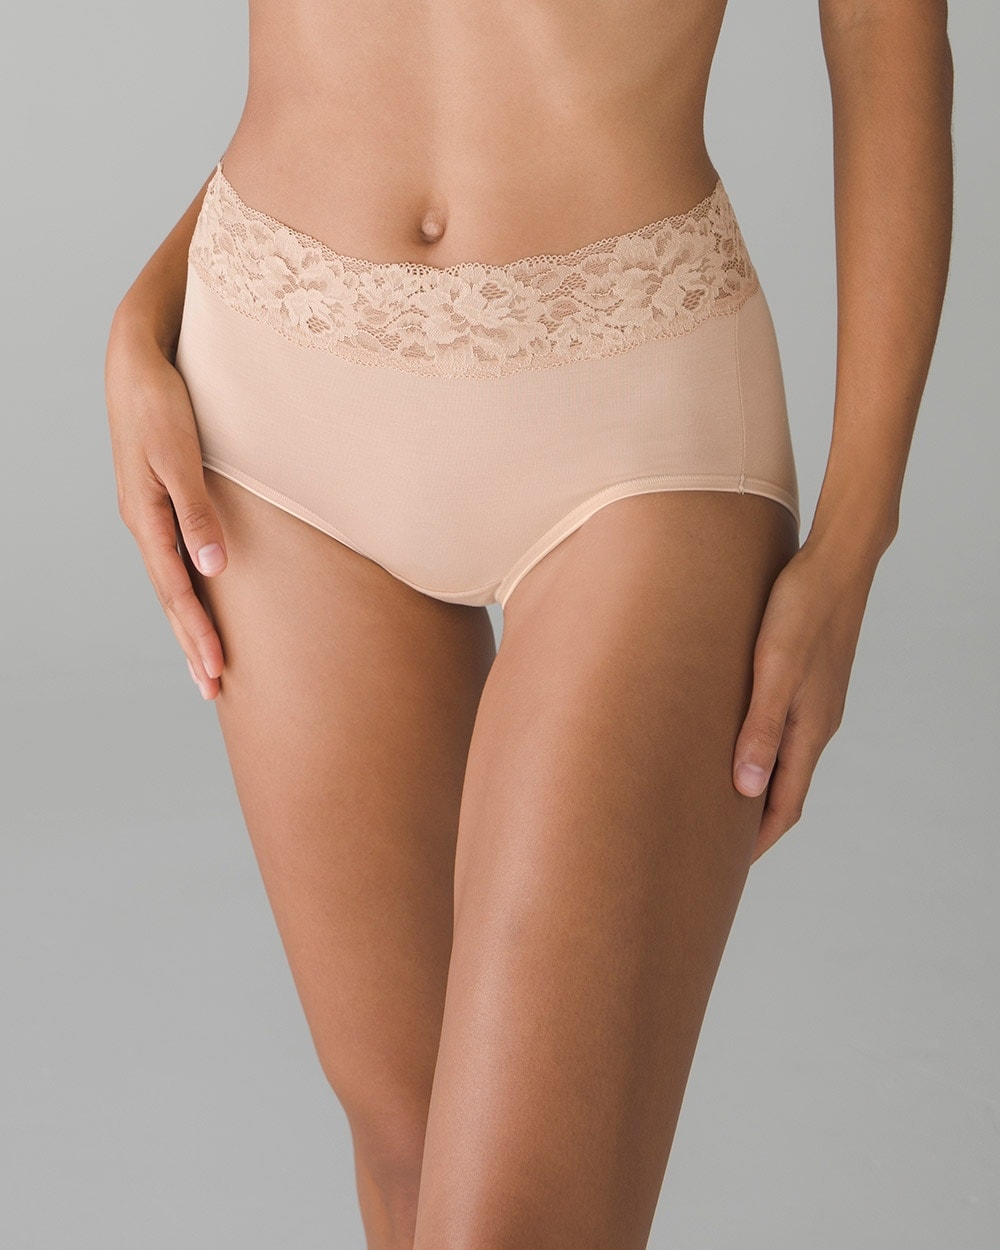 Shadowline Women's Panties-Low Rise Nylon Brief (3 Pack), Ivory, 5 at   Women's Clothing store